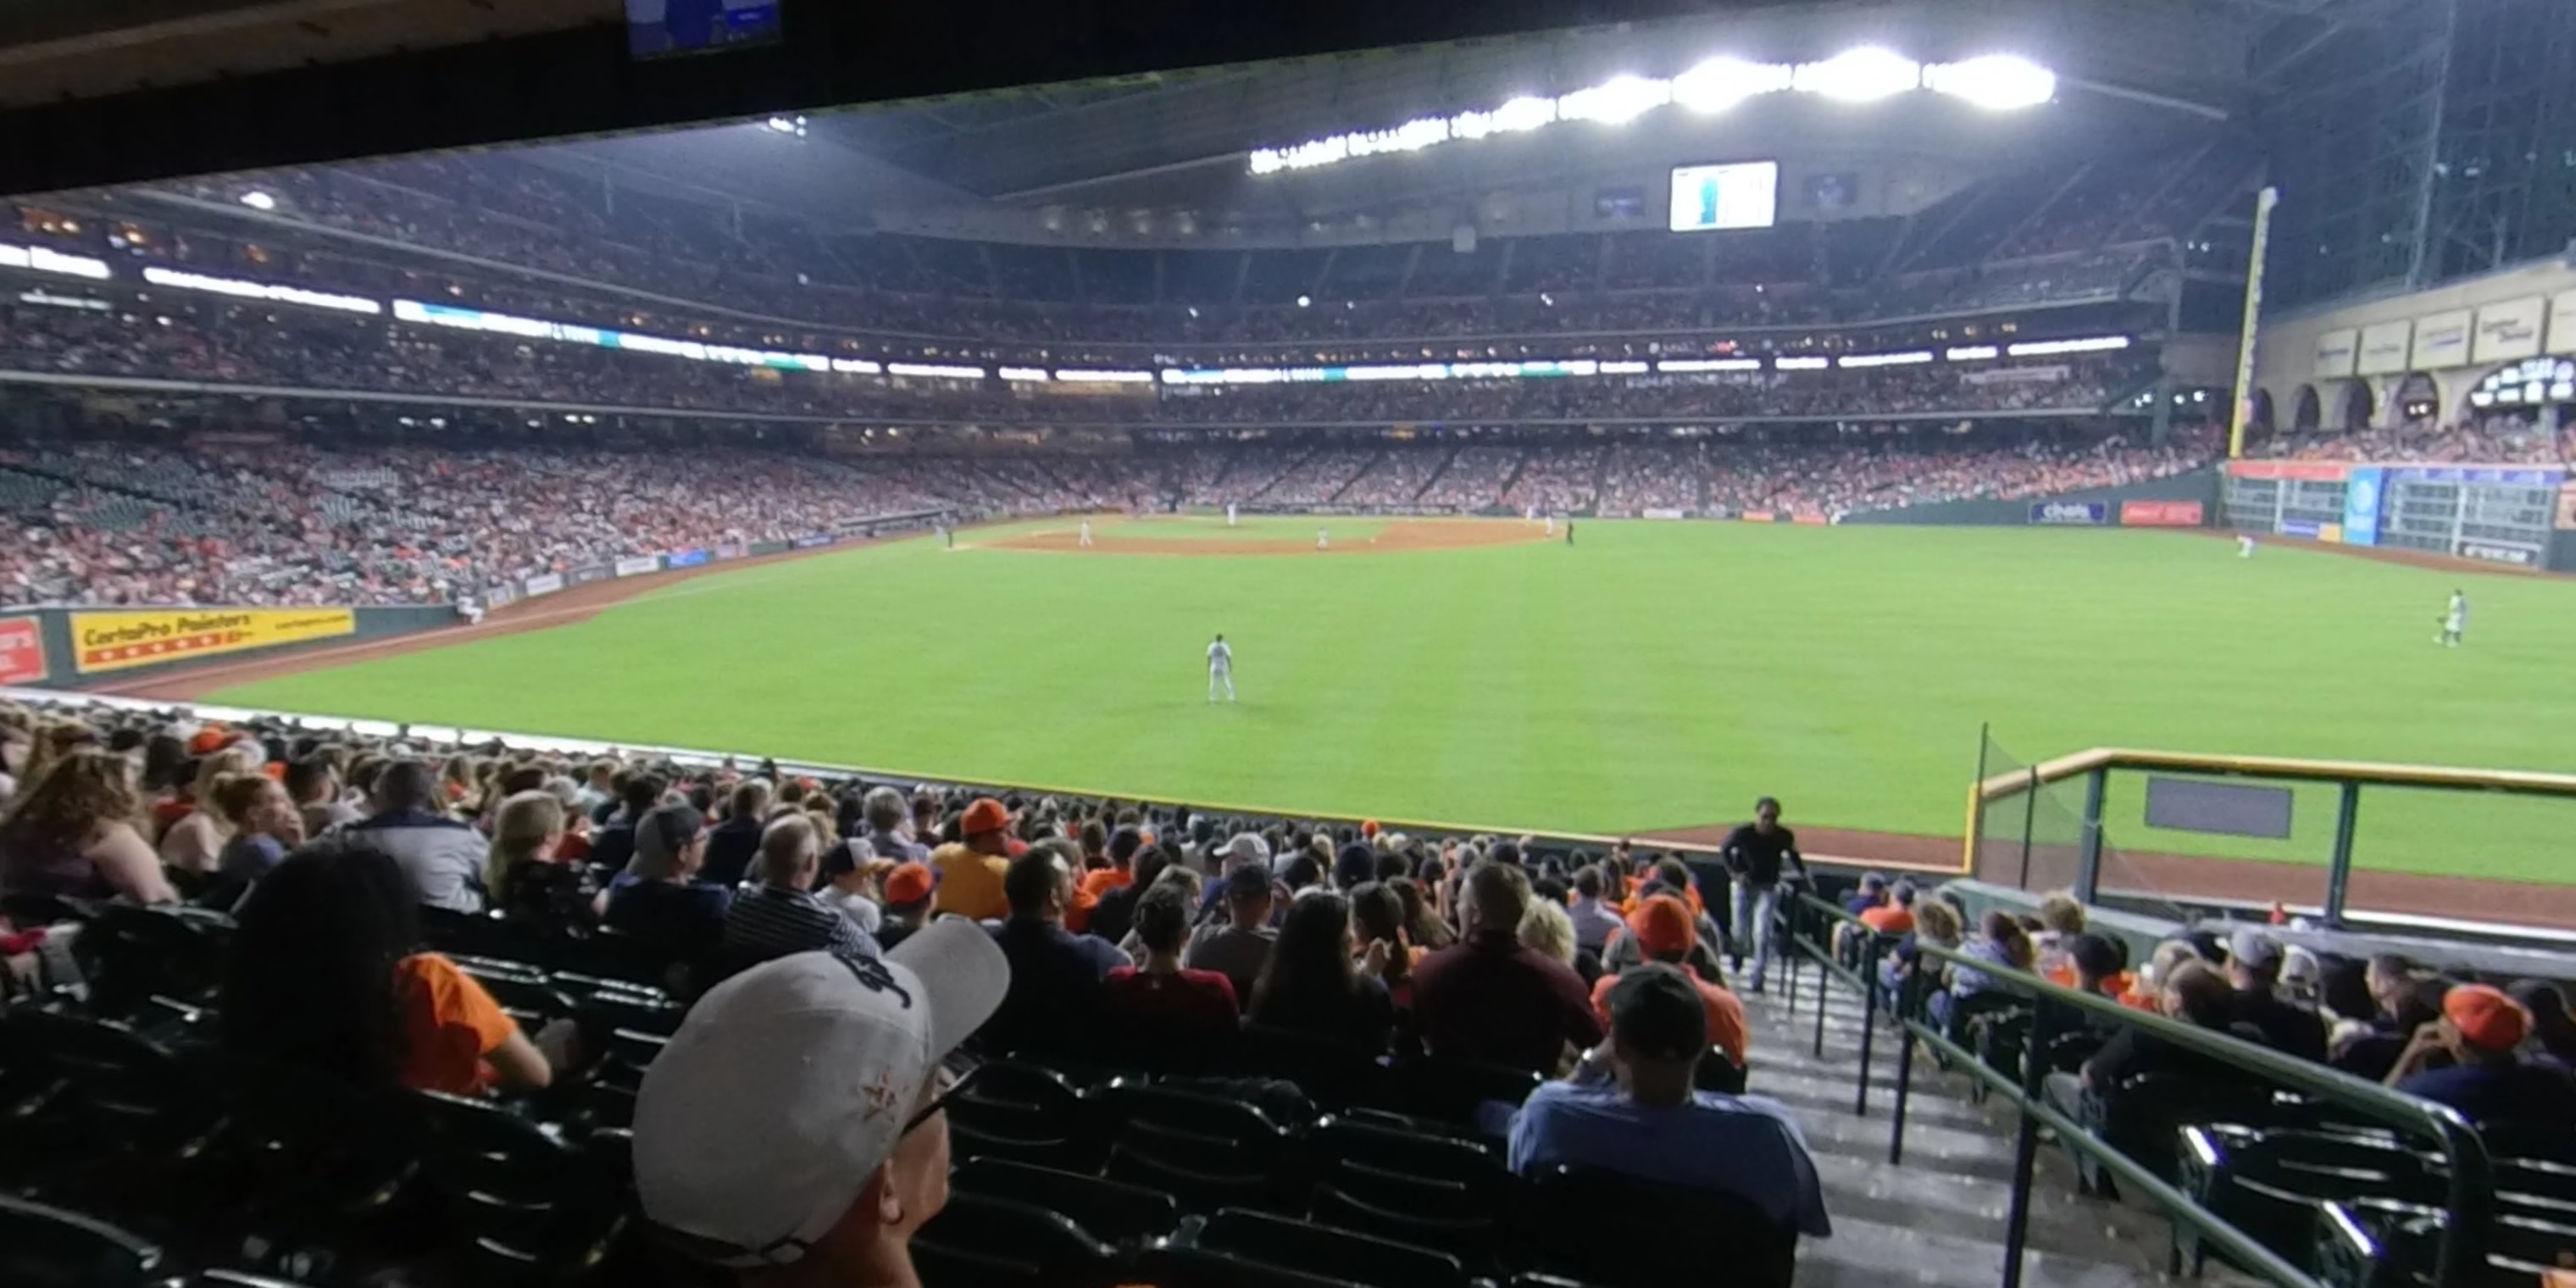 section 154 panoramic seat view  for baseball - minute maid park